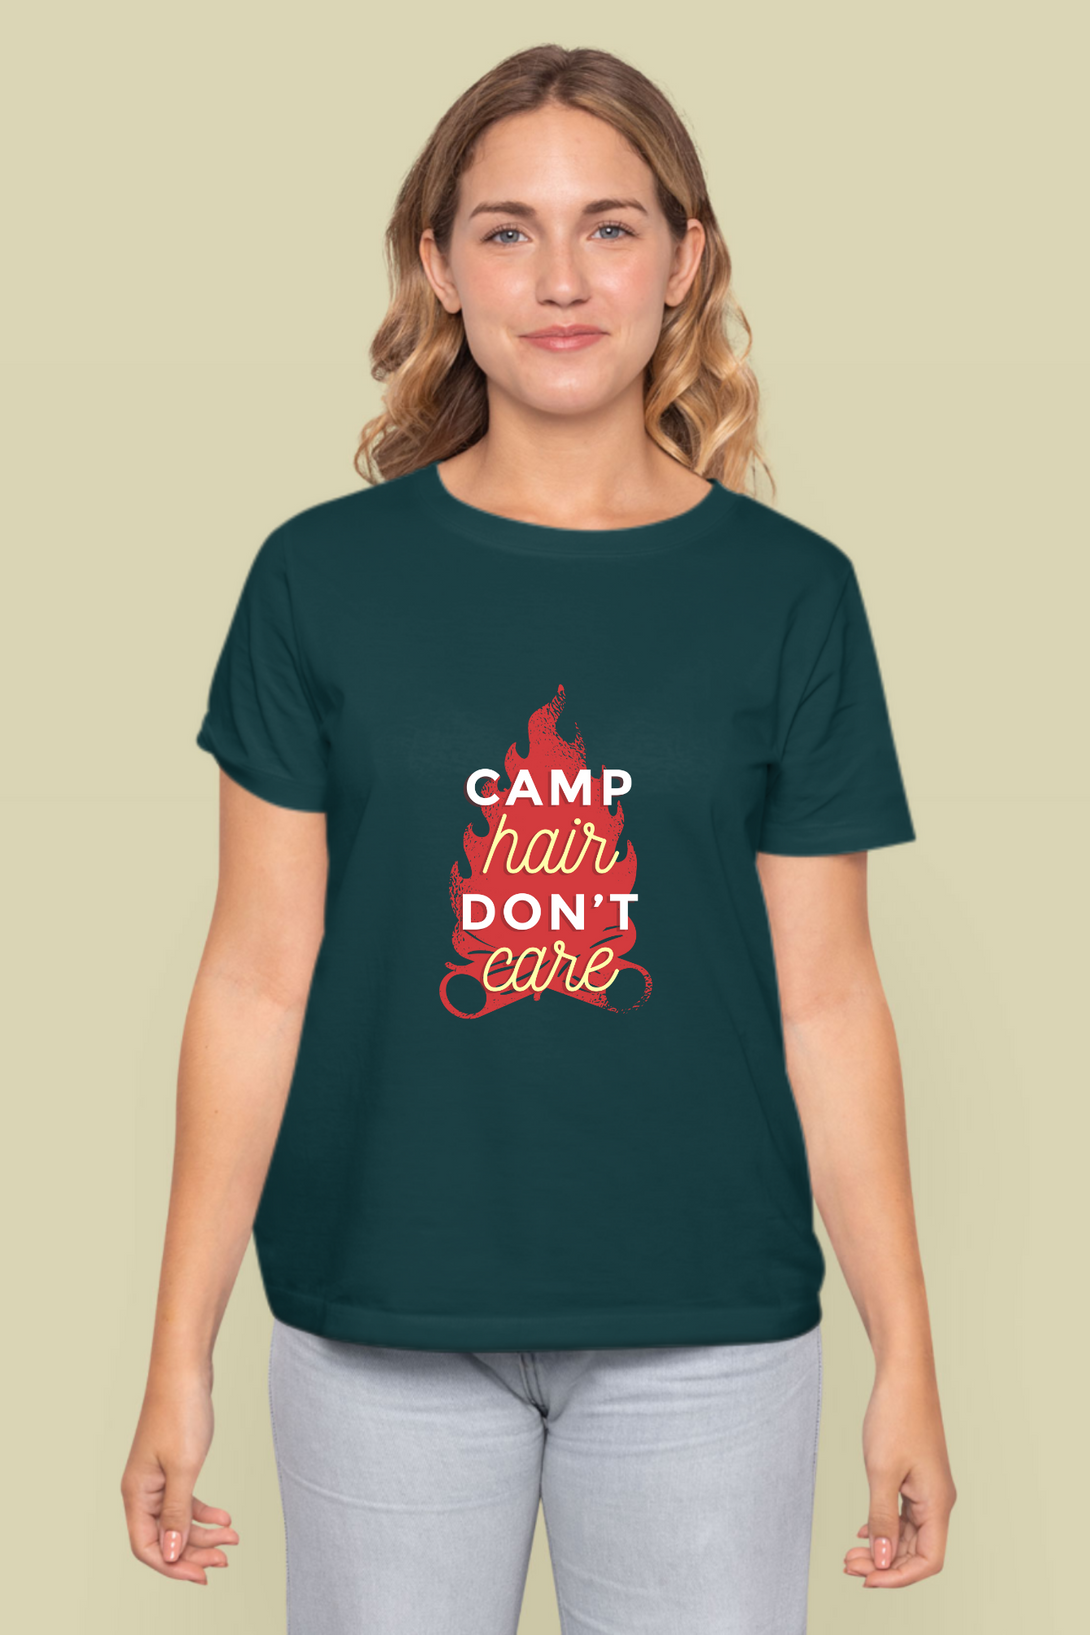 Camping Vibes Printed T-Shirt For Women - WowWaves - 14